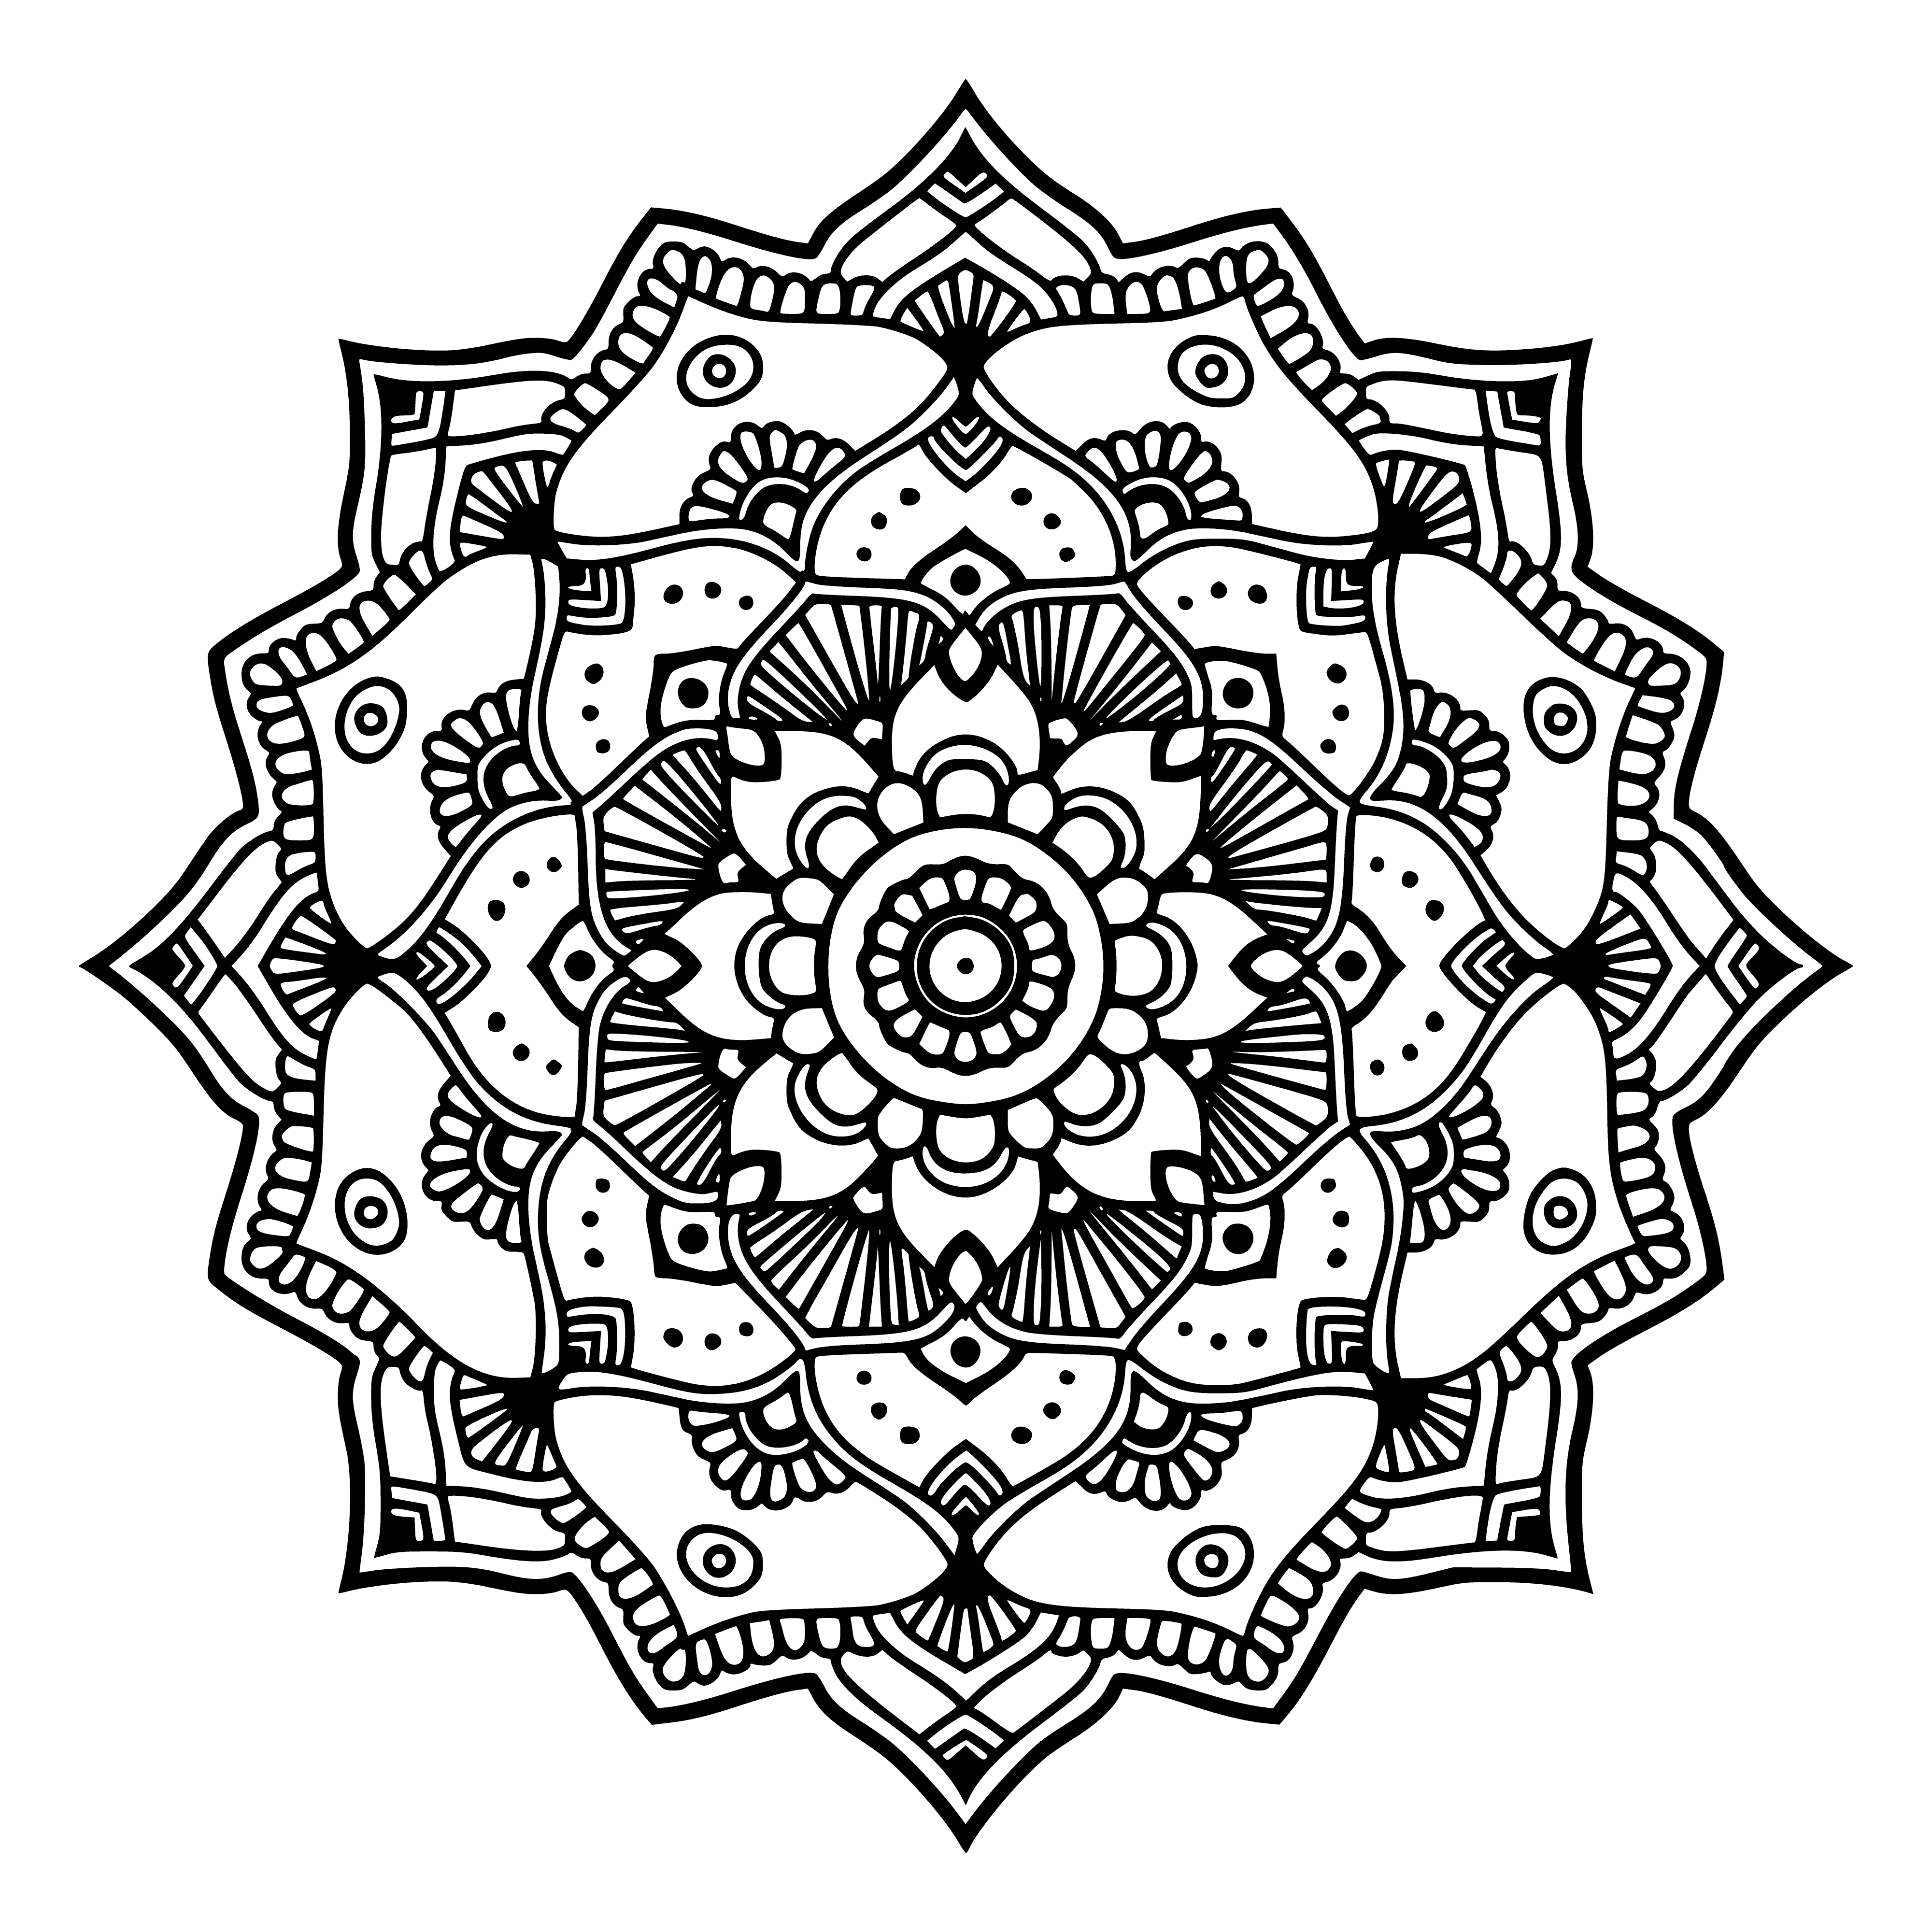 coloring page: Intricate flower mandala with 8 petals & 8 smaller flowers, leaves & vines, connected with a circular border. #art